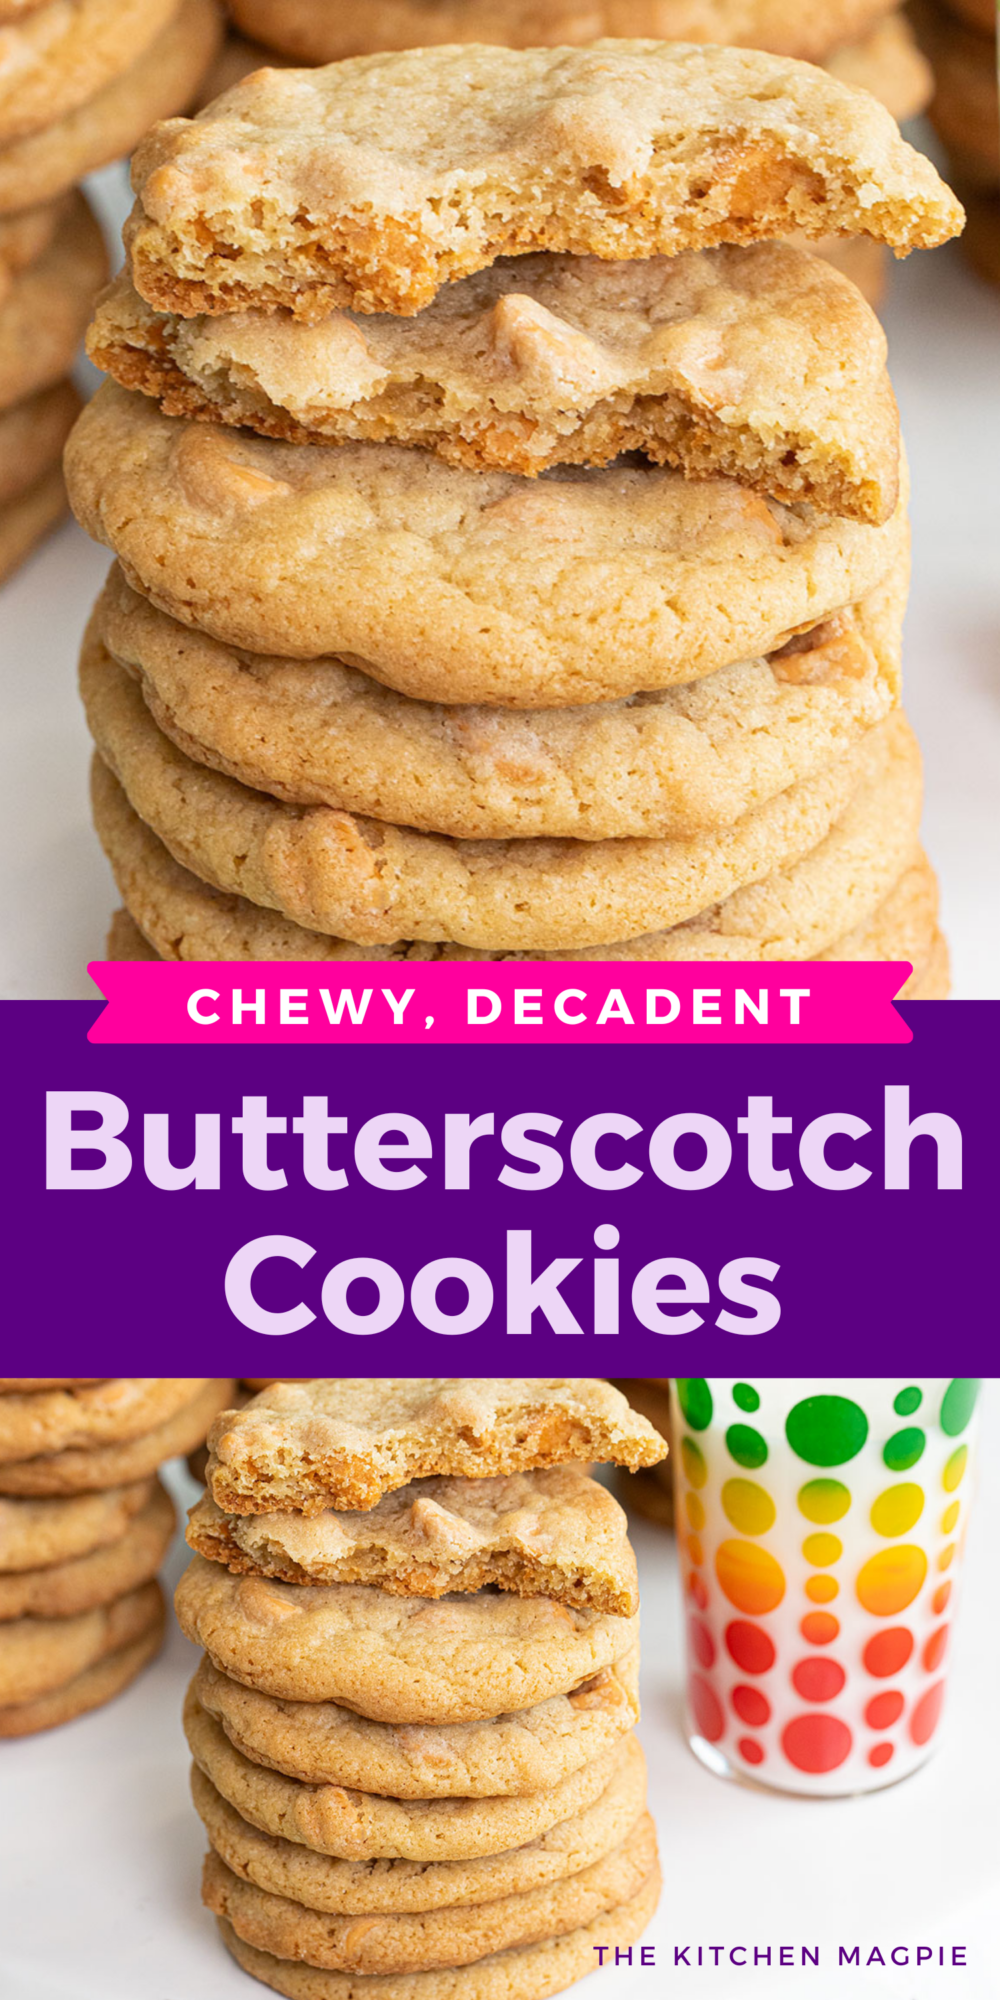 These butterscotch cookies are a snap to make! They are chewy and sweet and loaded with butterscotch chips!